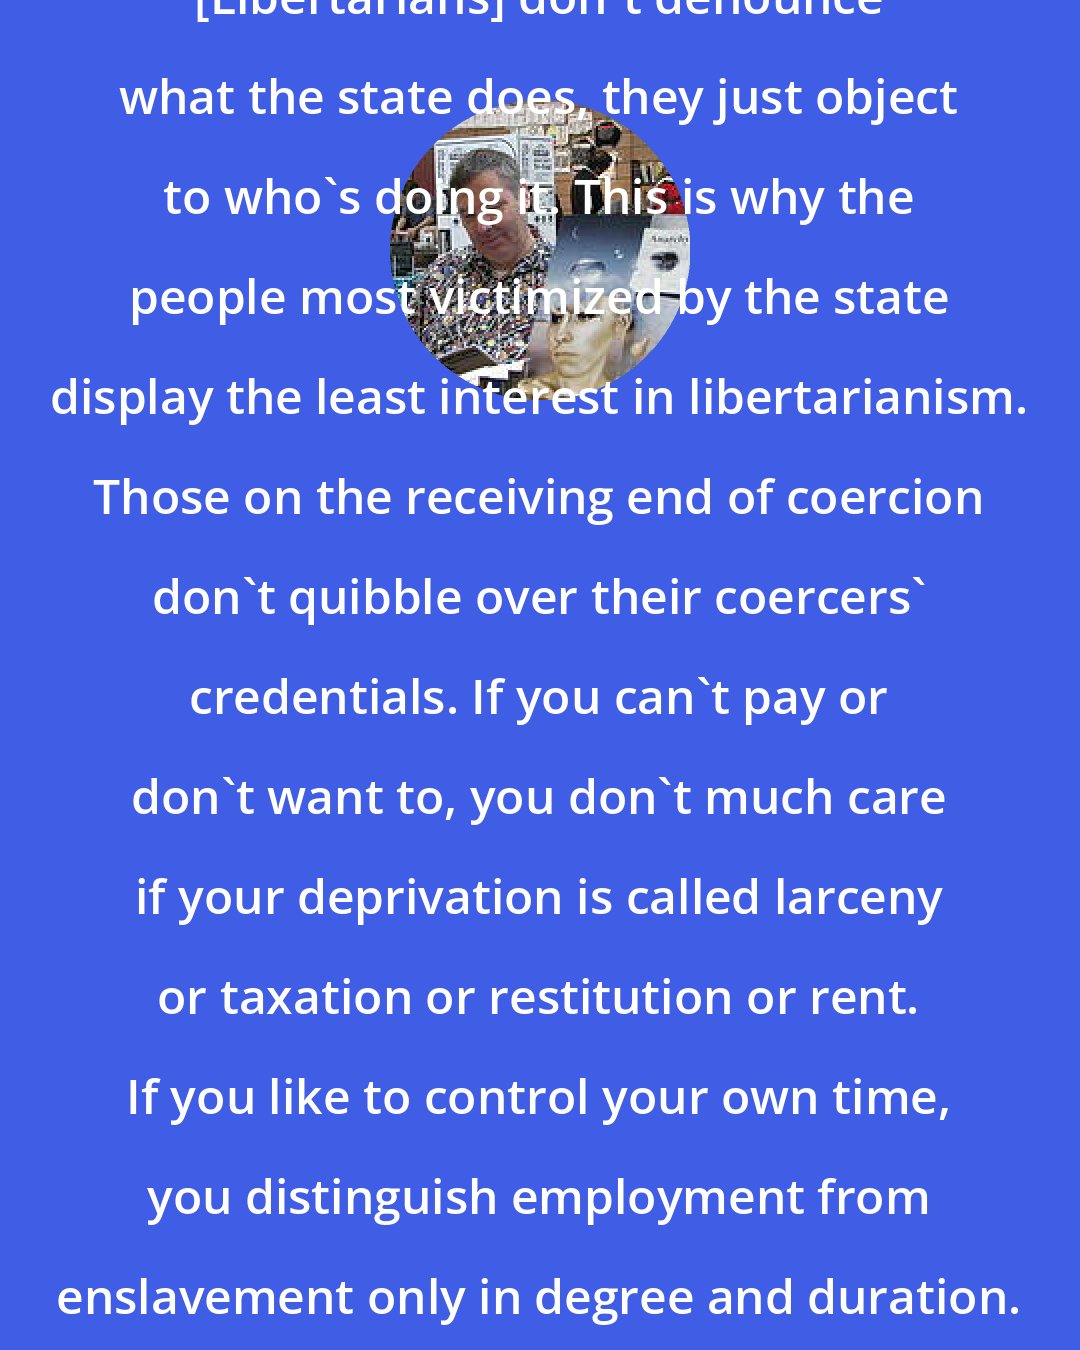 Bob Black: [Libertarians] don't denounce what the state does, they just object to who's doing it. This is why the people most victimized by the state display the least interest in libertarianism. Those on the receiving end of coercion don't quibble over their coercers' credentials. If you can't pay or don't want to, you don't much care if your deprivation is called larceny or taxation or restitution or rent. If you like to control your own time, you distinguish employment from enslavement only in degree and duration.